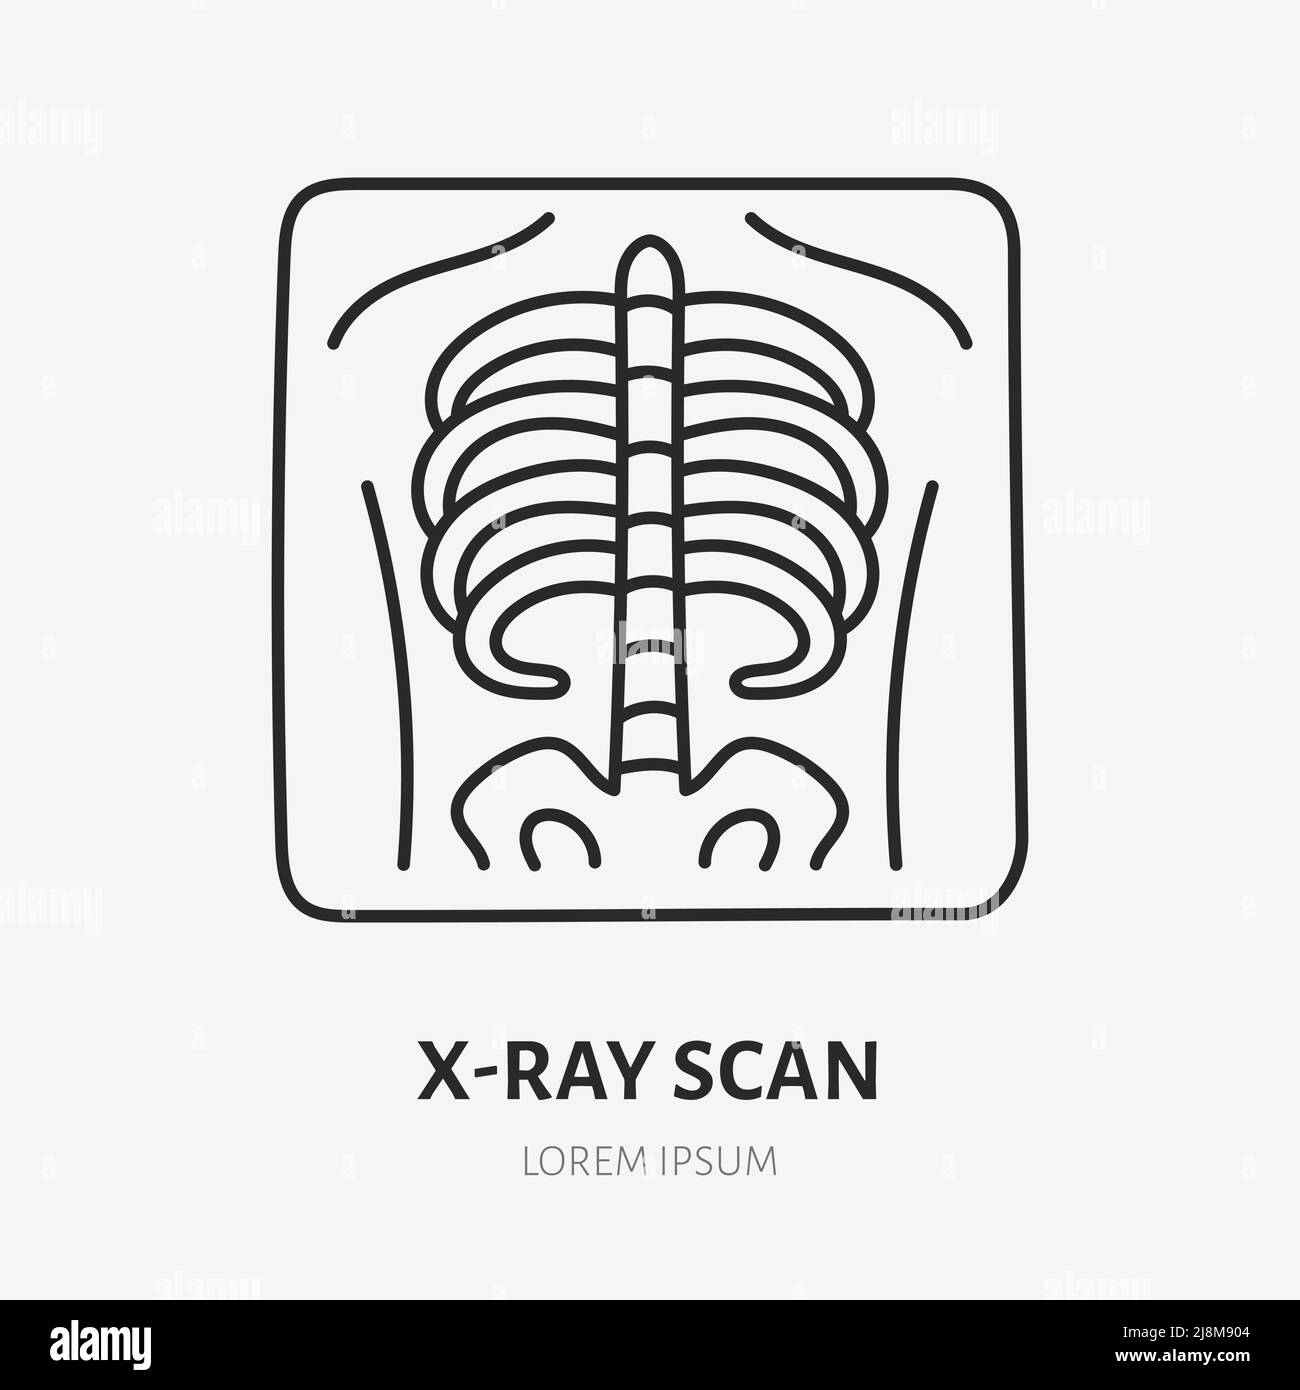 Xray scan doodle line icon. Vector thin outline illustration of chest ct. Black color linear sign for radiology diagnostic Stock Vector